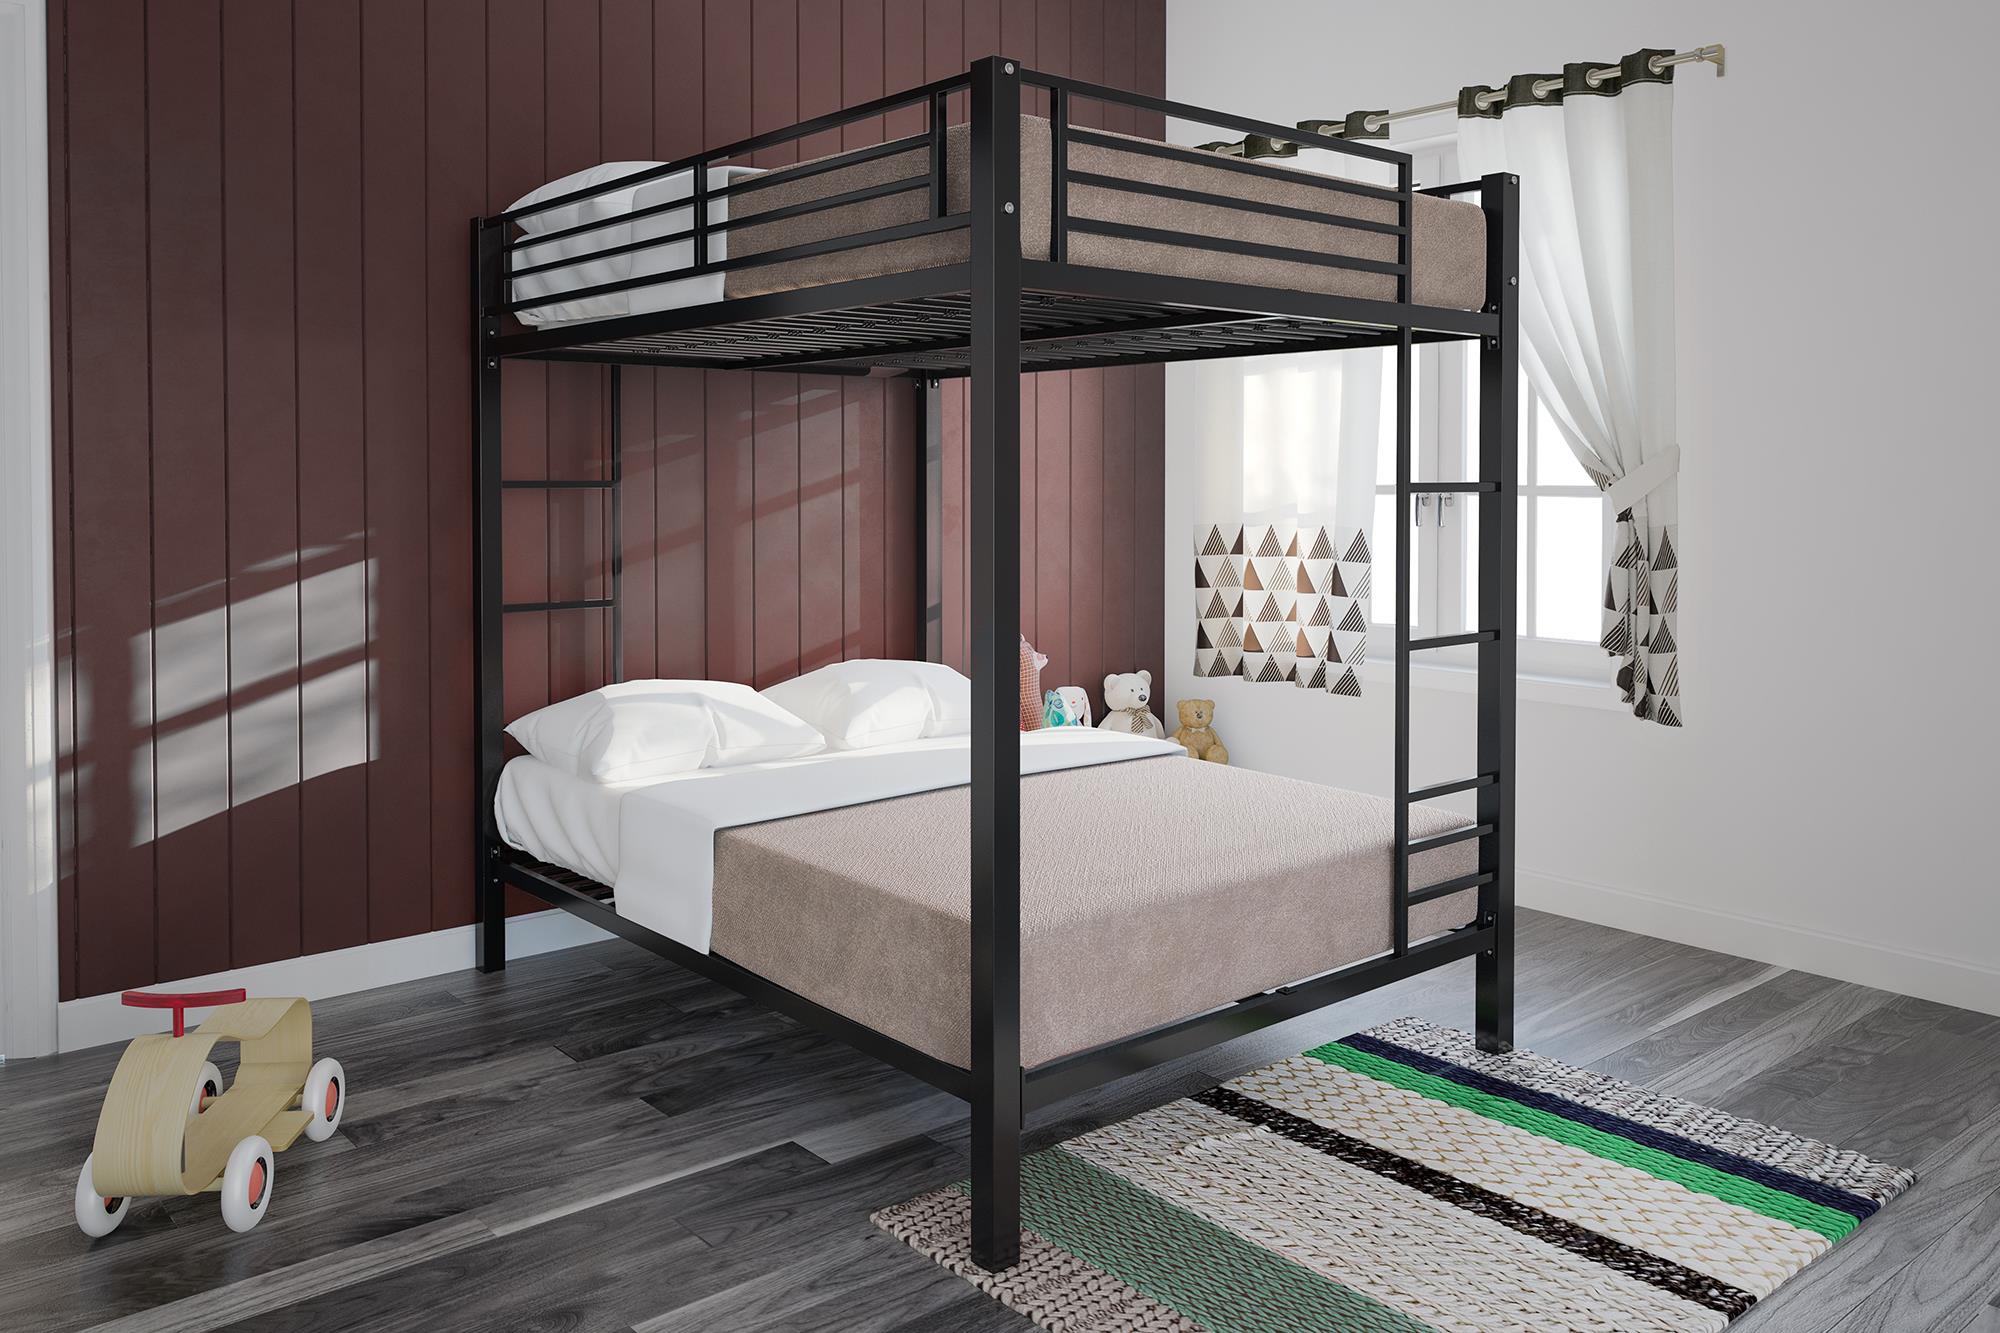 Bunk Beds For Kids, Types Of Bunk Beds